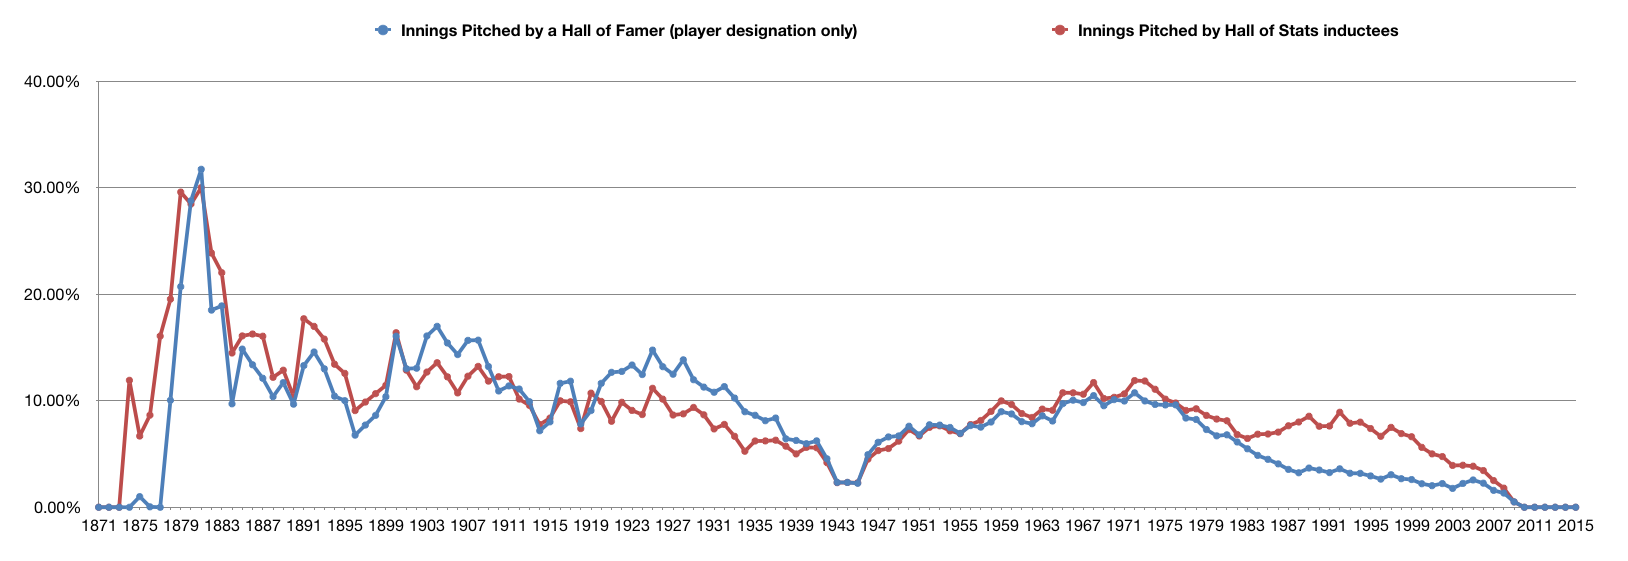 Percentage of Innings Pitched made by a Hall of Famer and a Hall of Stats member